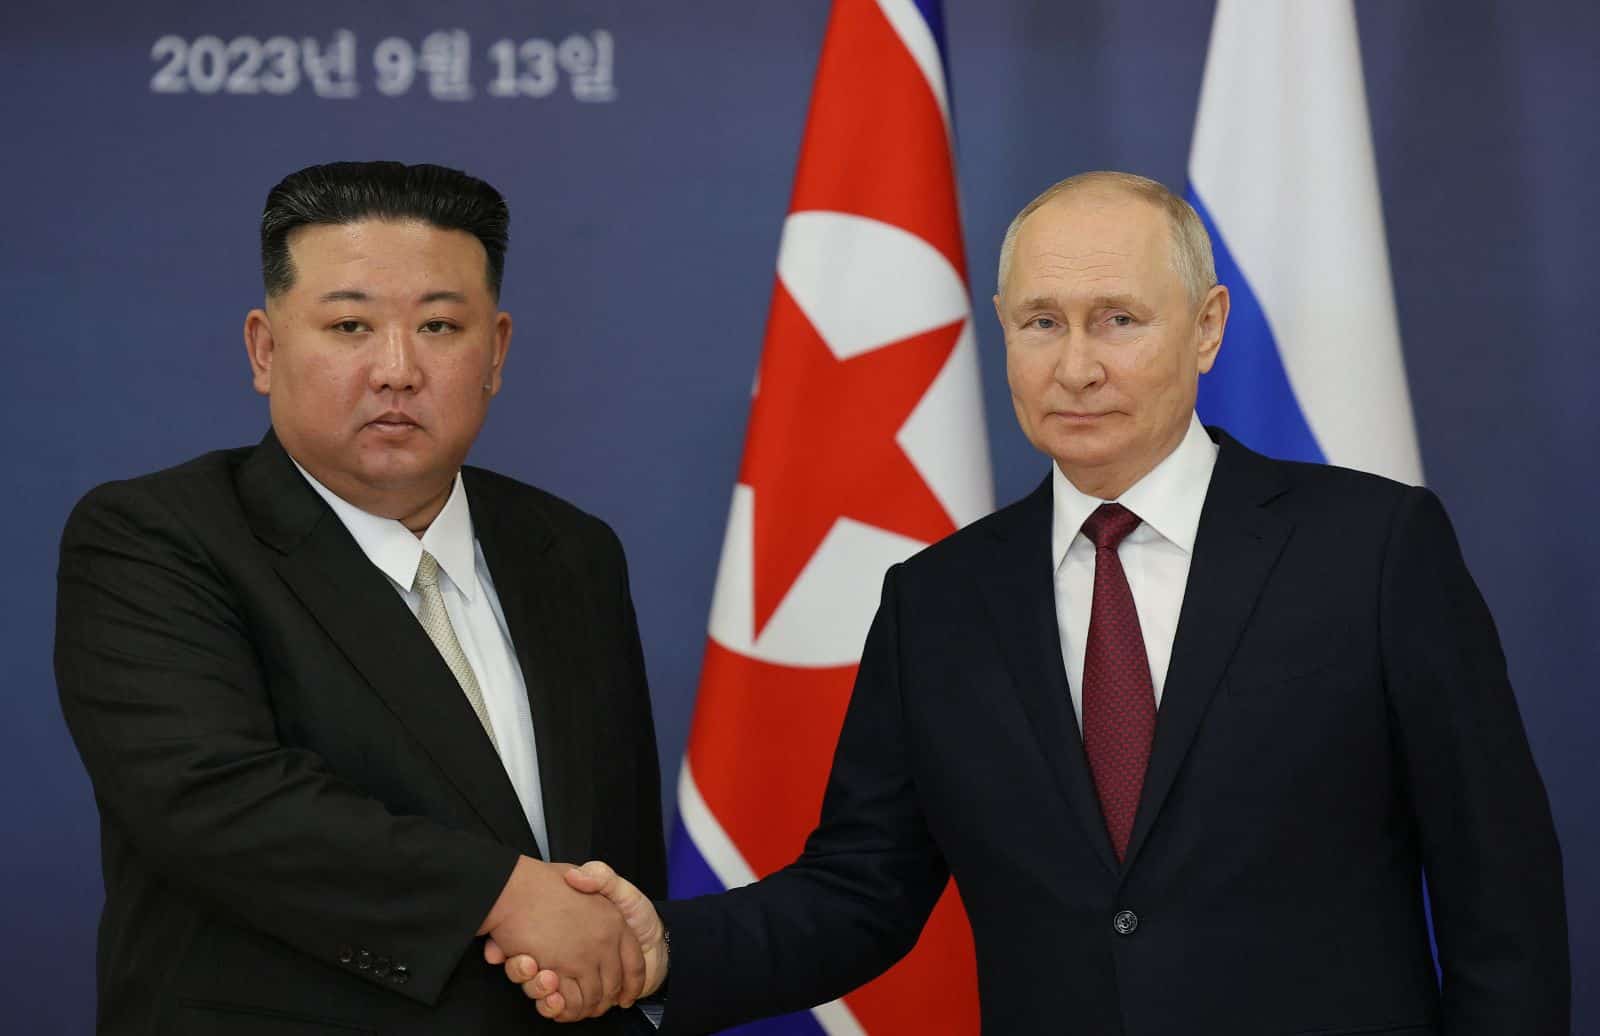 Kim Jong Un says Russia will win 'great victory' over enemies